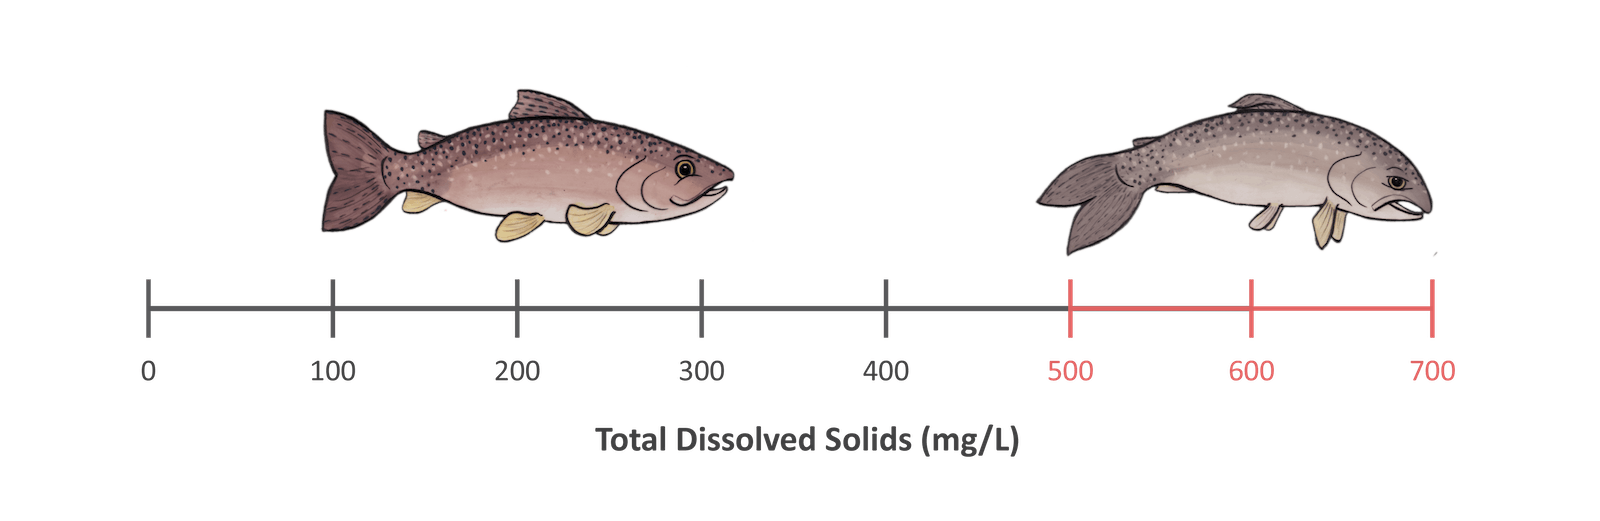 Concentration scale for total dissolved solids showing healthy fish between 0 and 300 milligrams per liter and unhealthy fish between 500 and 700 milligrams per liter.